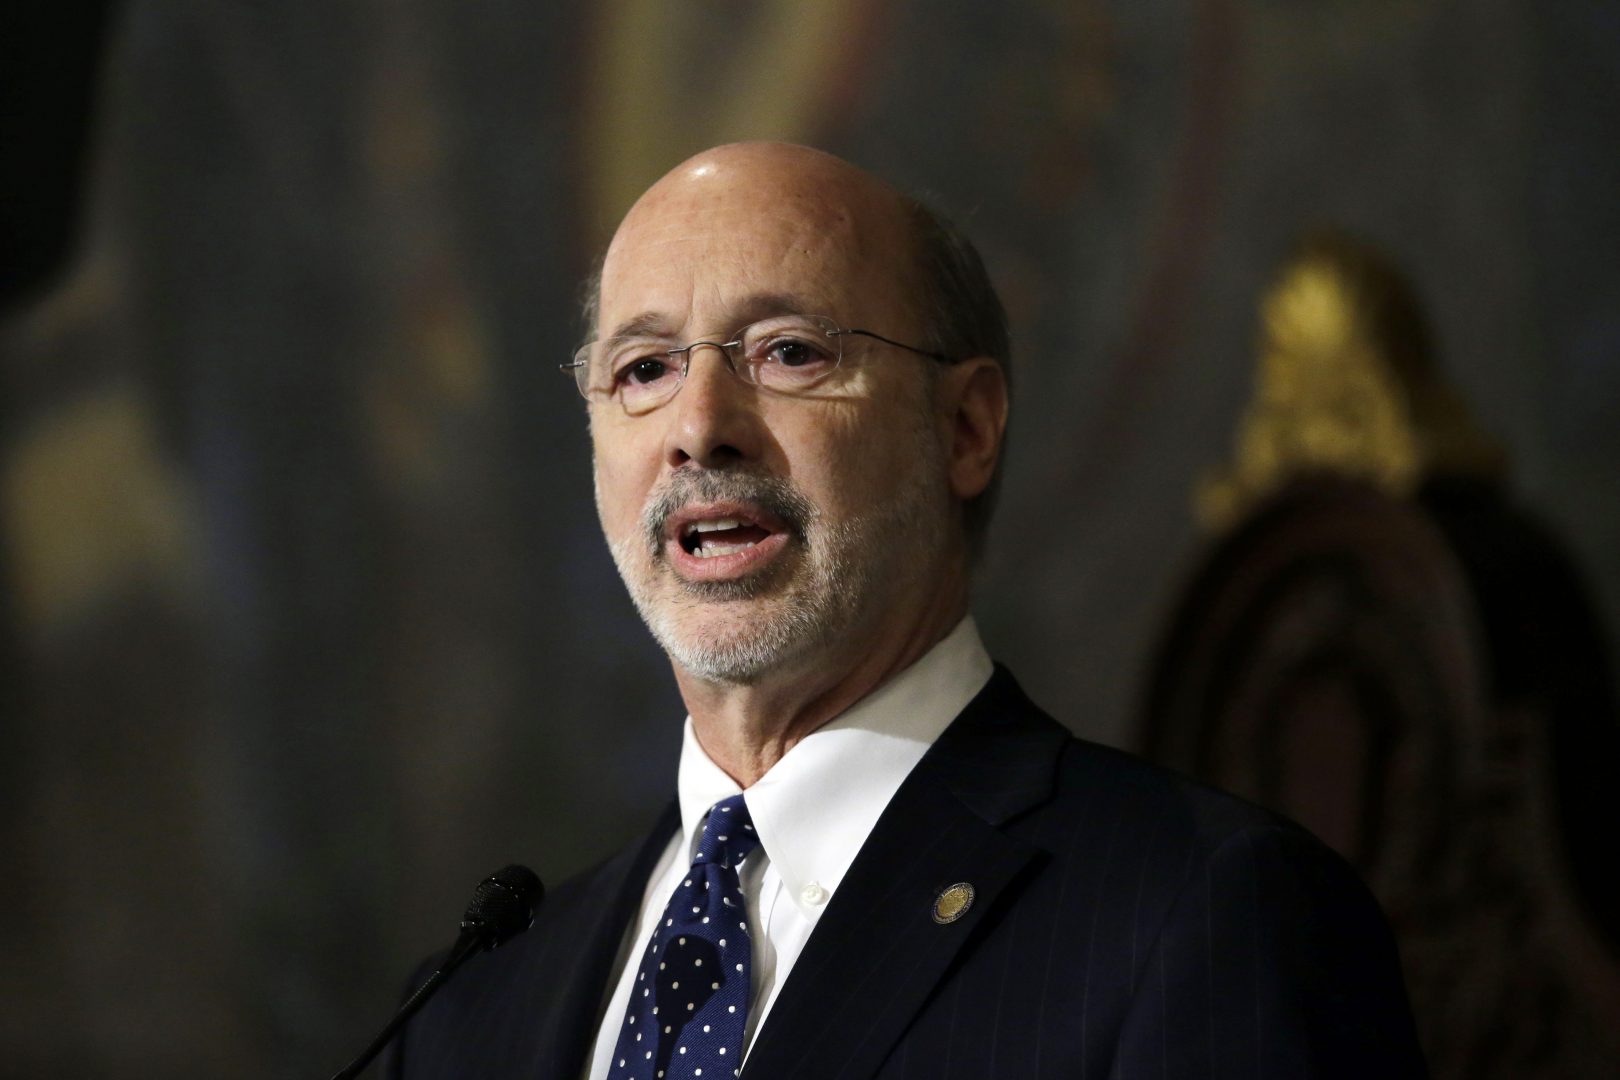 Governor Tom Wolf's severance tax proposals have become something of an annual tradition. In keeping with that tradition, Republicans have said they have no intention of passing his latest version of the plan.